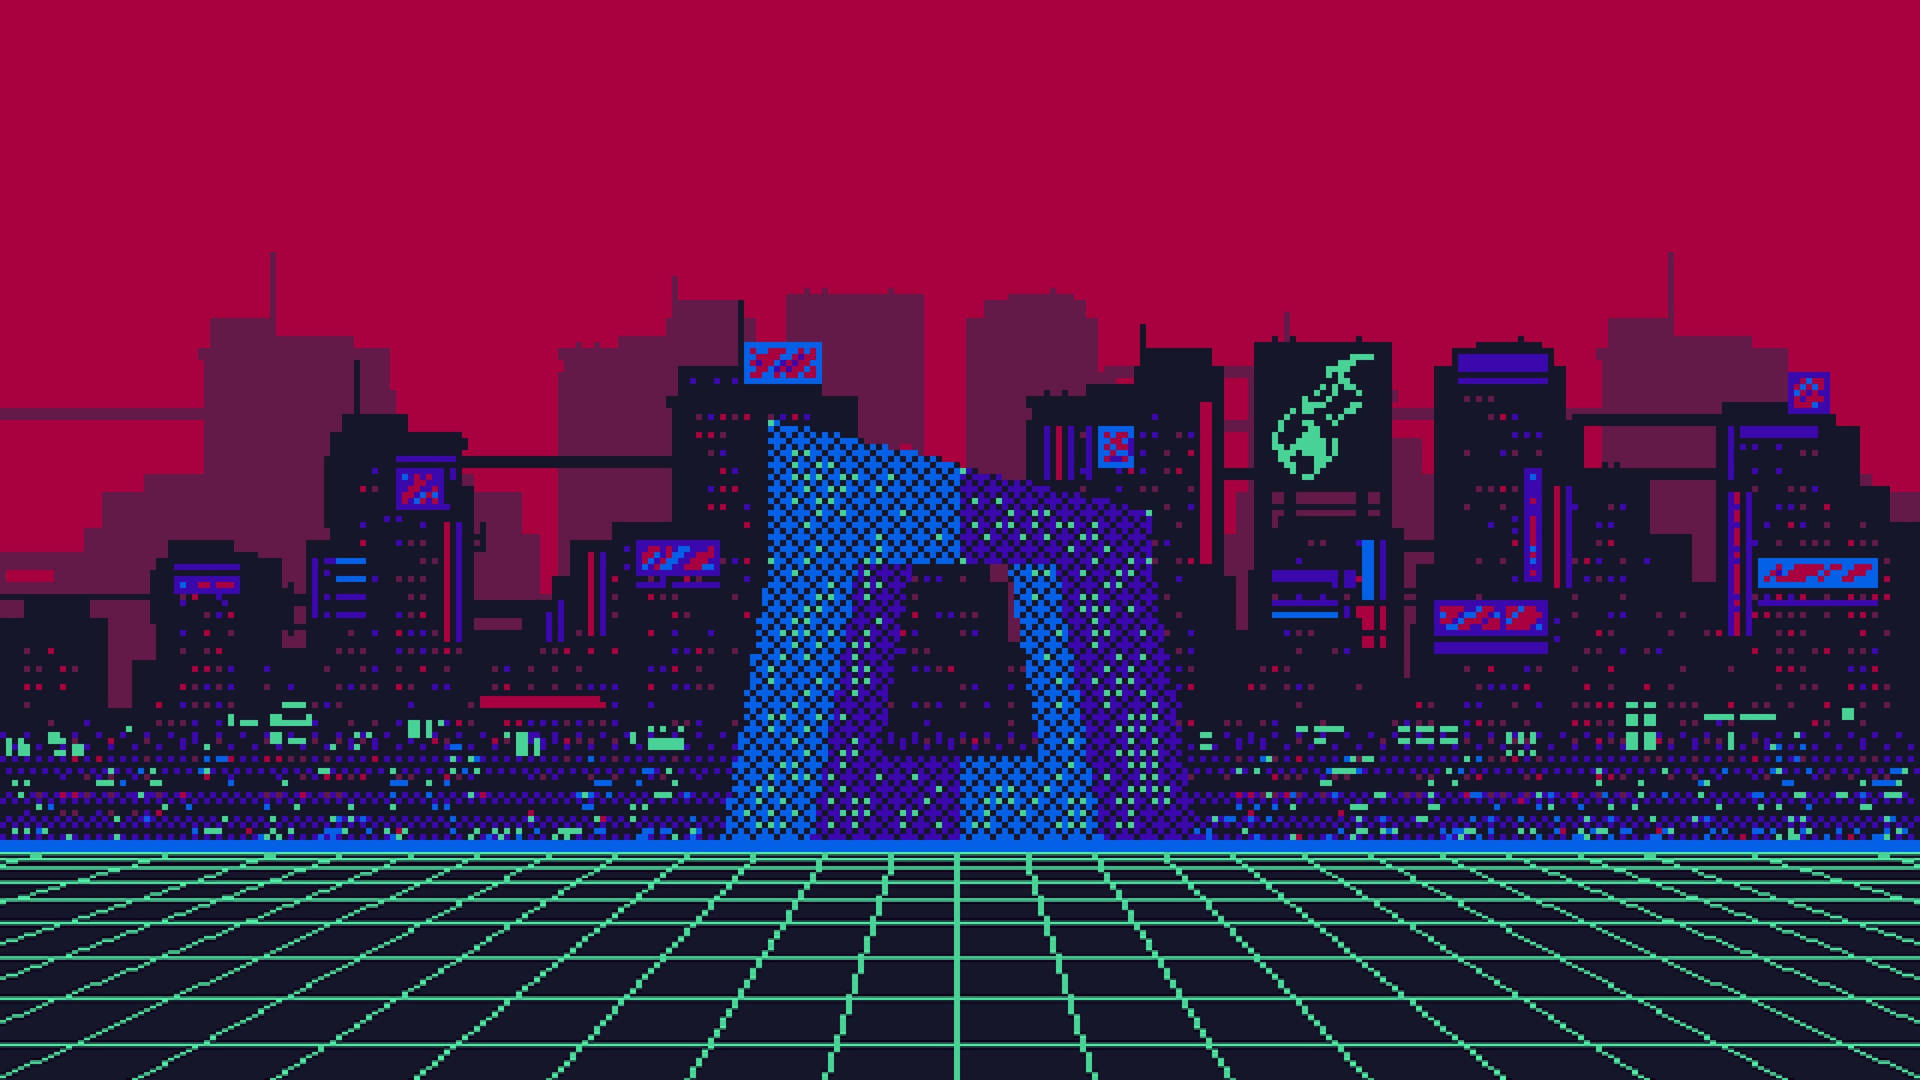 8 Bit 3840X2160 Wallpaper and Background Image